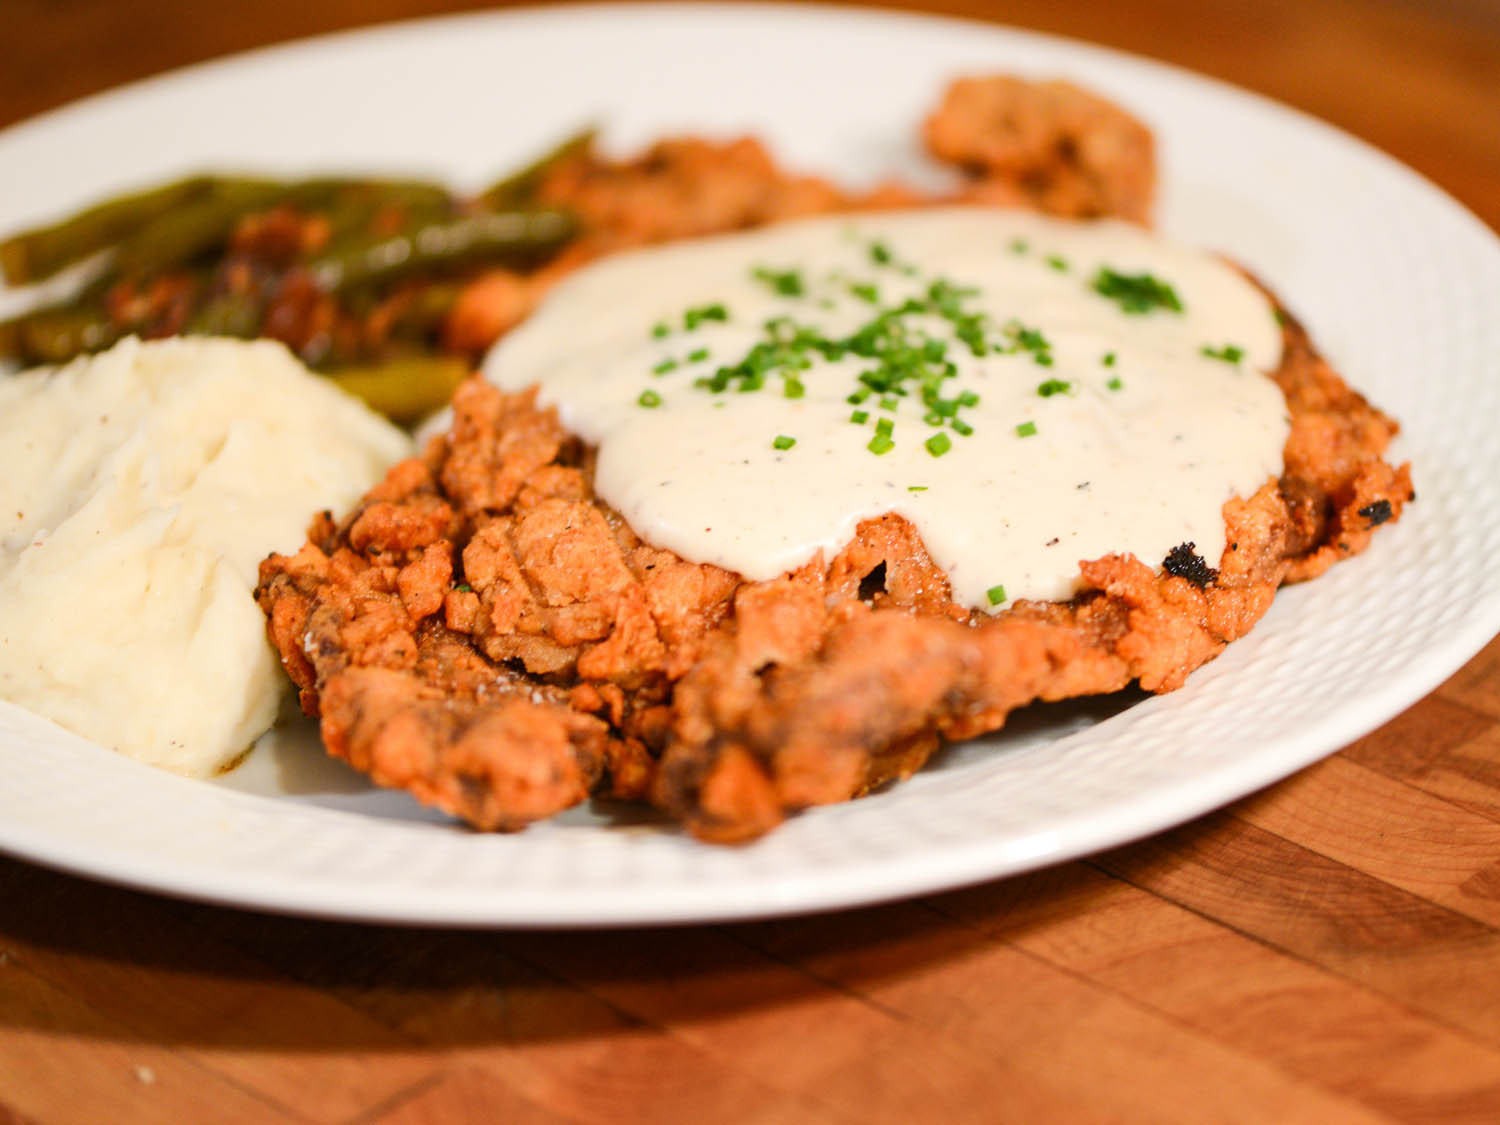 How To Make Chicken Fried Steak
 How to Make the Most Beefy Tender and Crispy Chicken